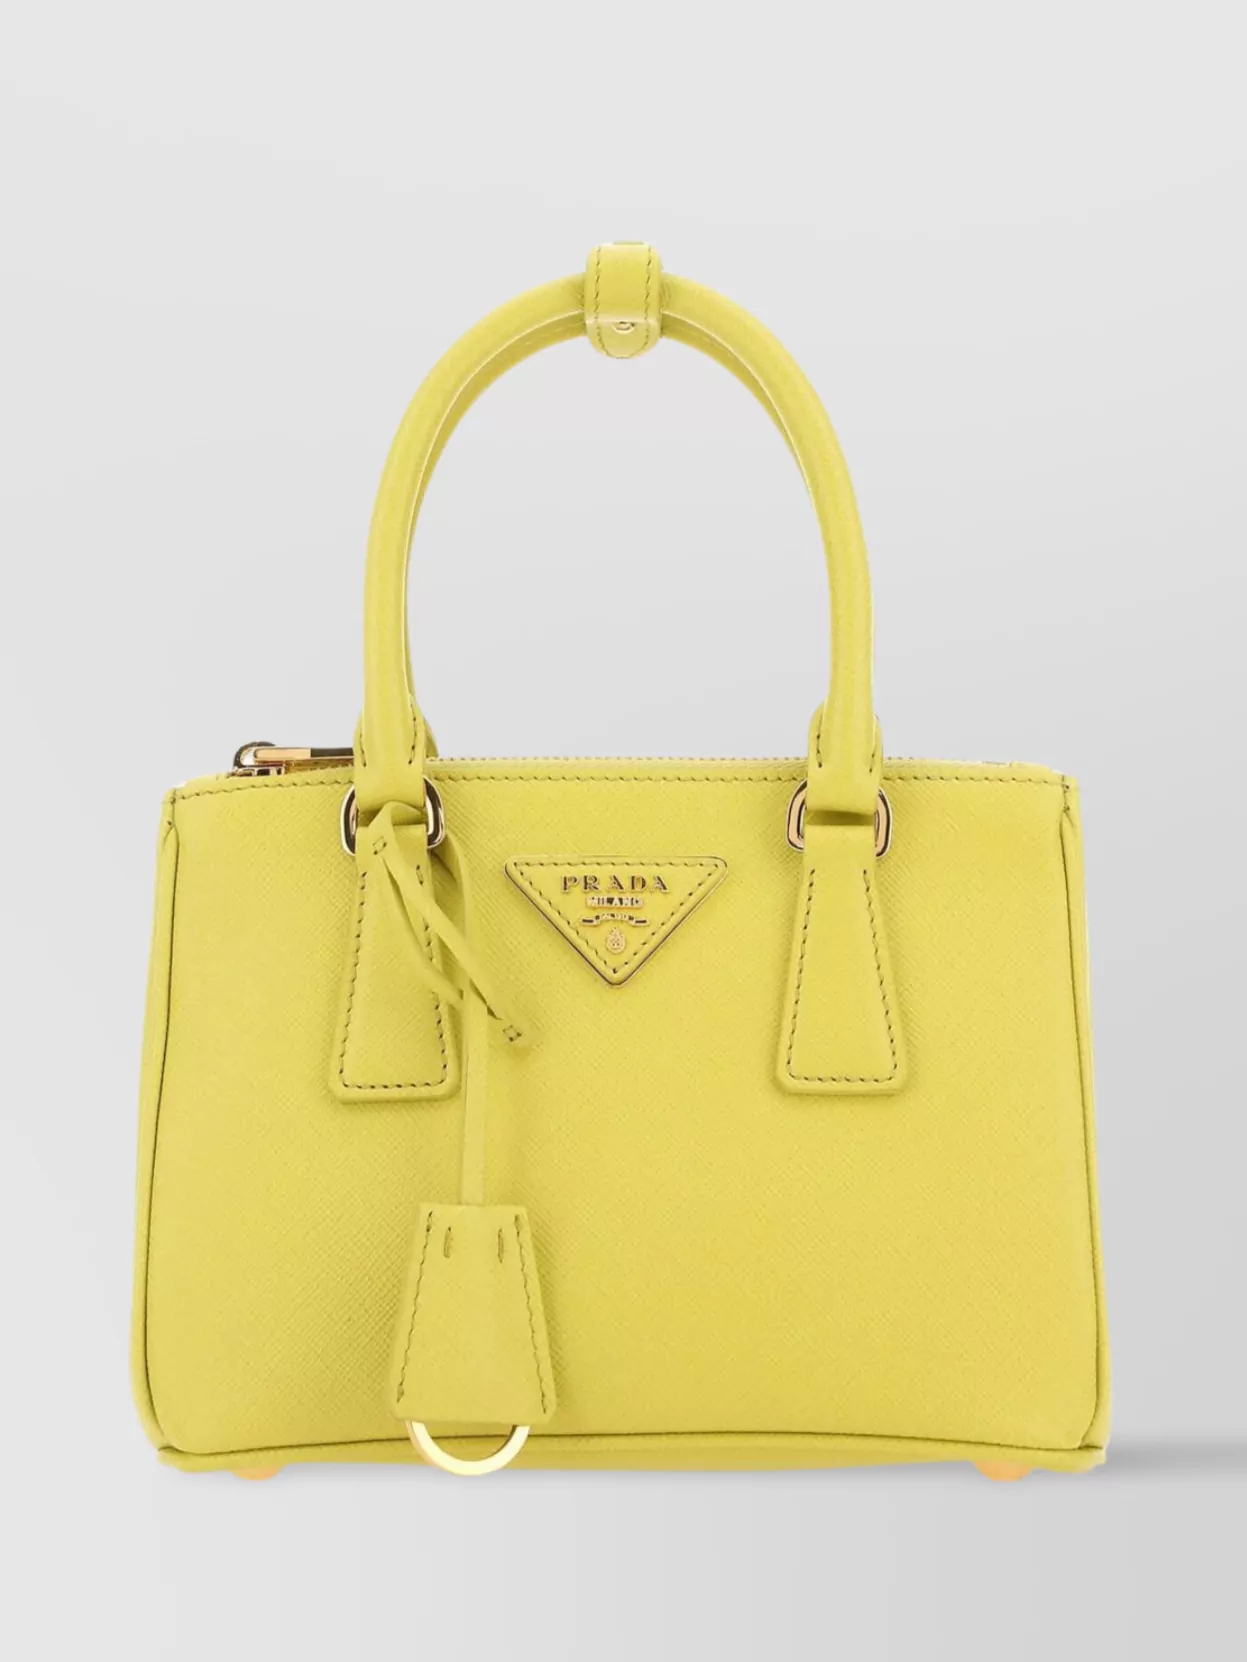 Shop Prada Galleria Versatile Leather Handbag With Detachable Strap And Stylish Accessories In Yellow